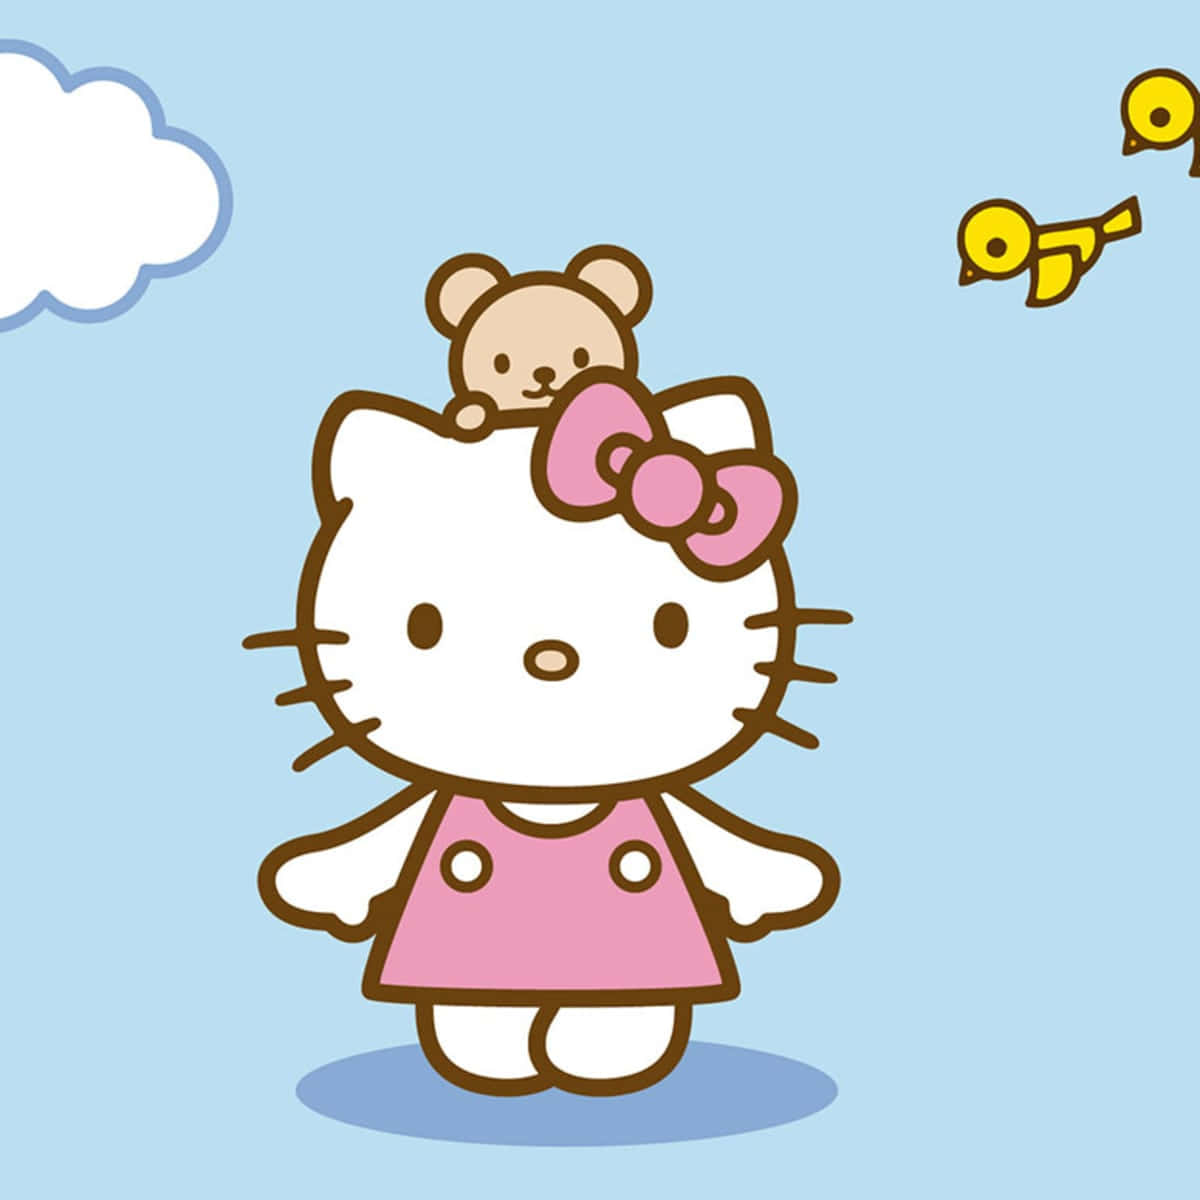 Cutest Hello Kitty in the World